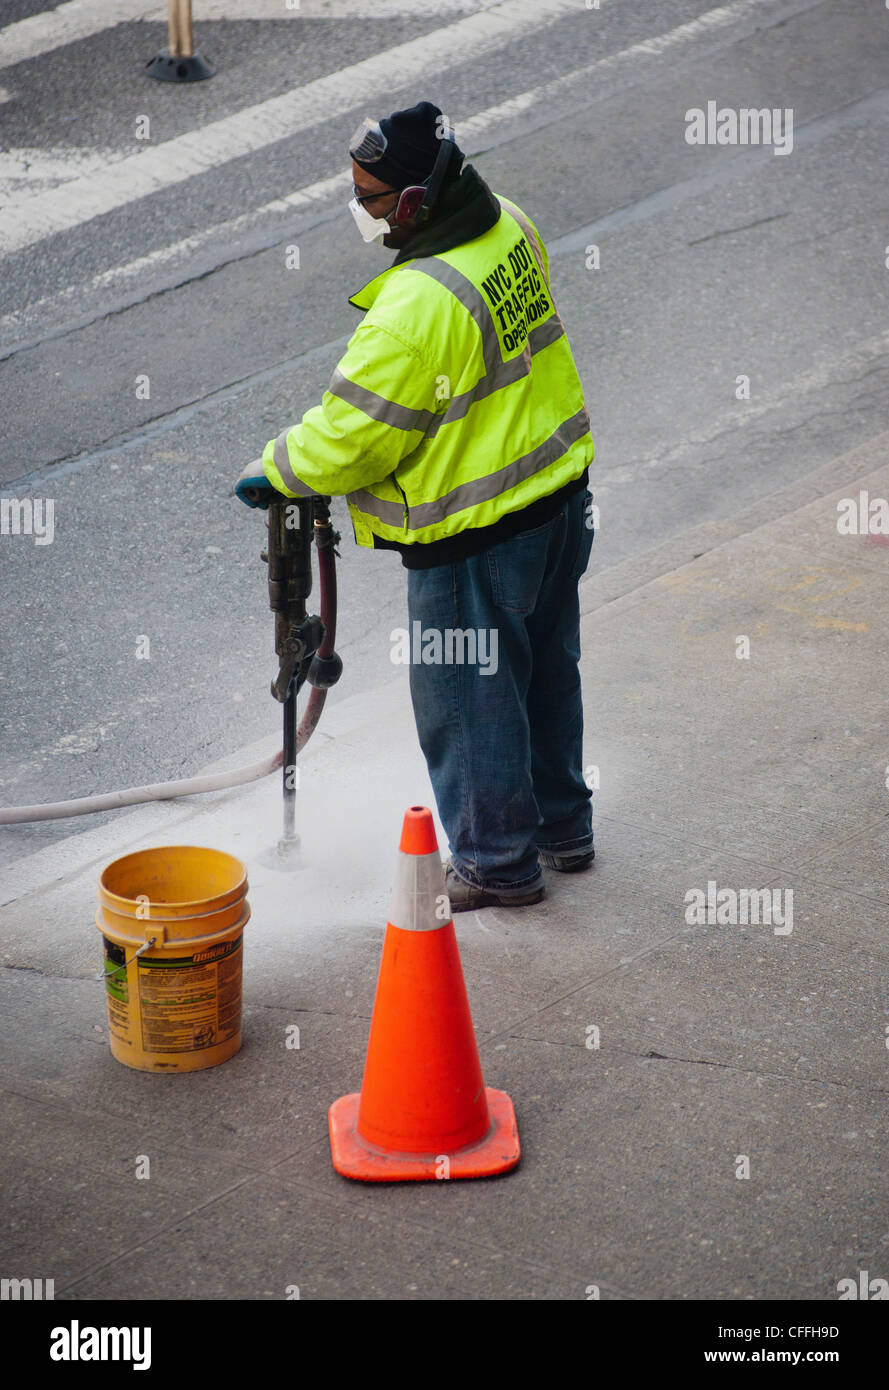 NYC Dept. of Transportation worker uses a jackhammer to break up a concrete sidewalk for a replacement sign project Stock Photo